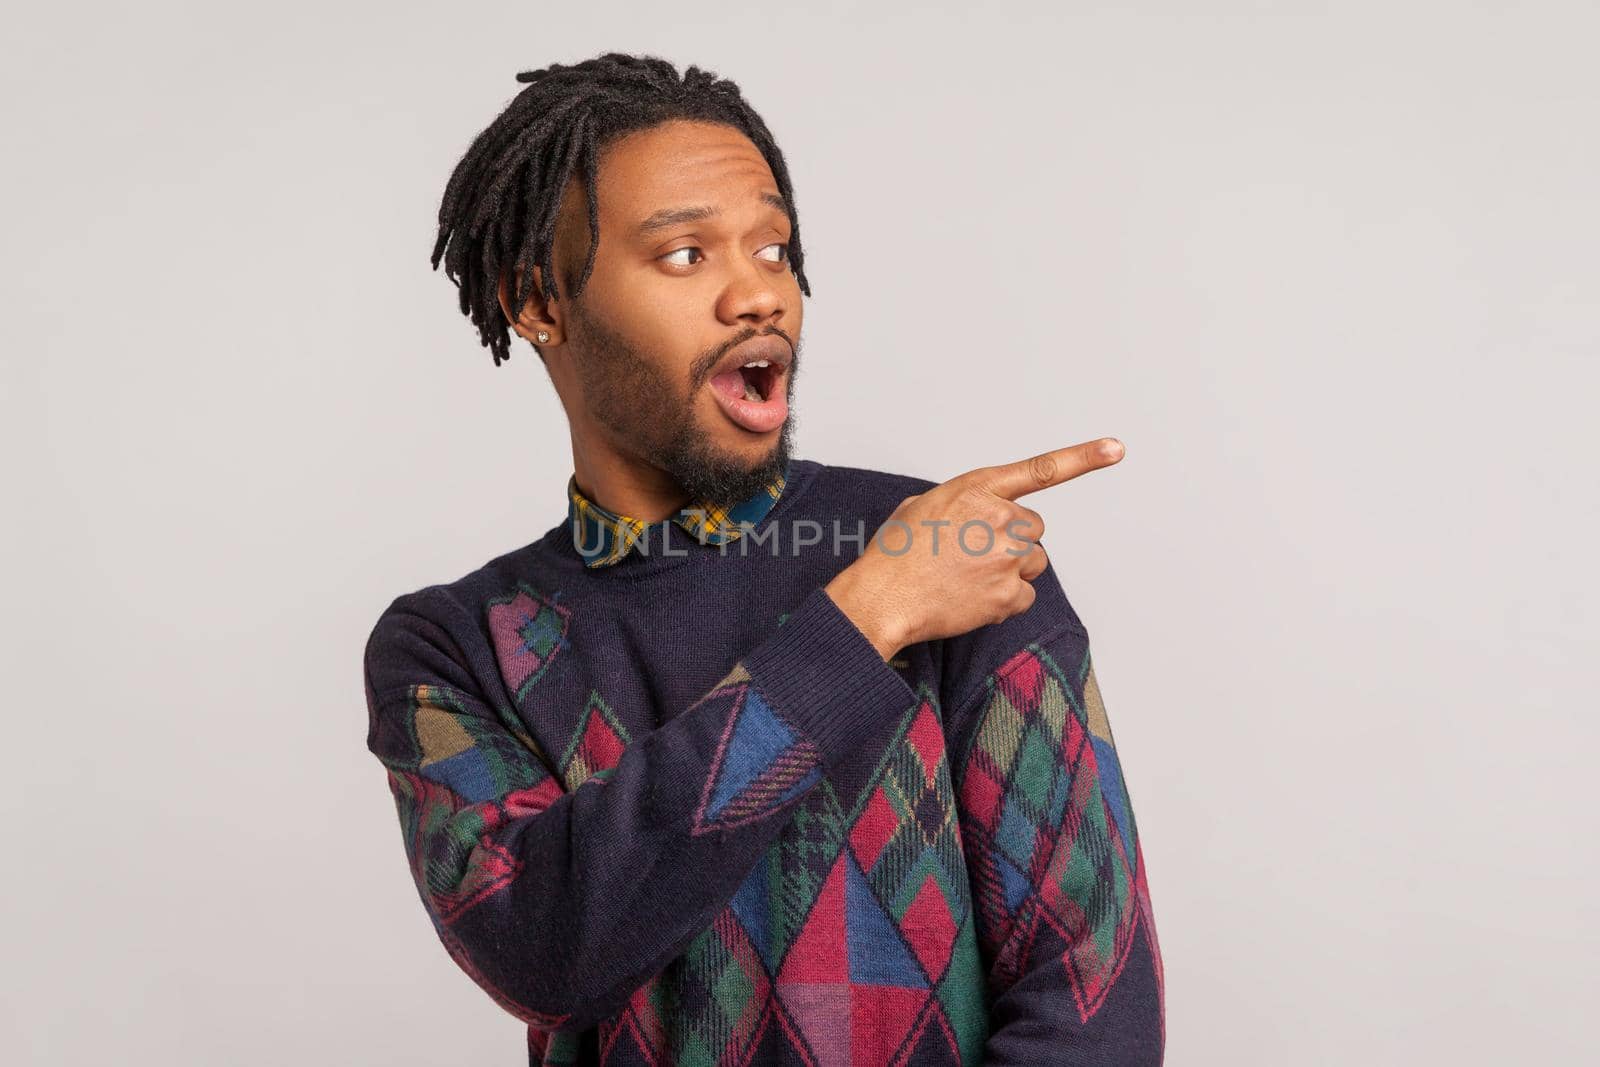 Extremely surprised african guy with dreadlocks pointing finger away with big eyes and open mouth, wondered amazed with advertisement, freespace. Indoor studio shot isolated on gray background